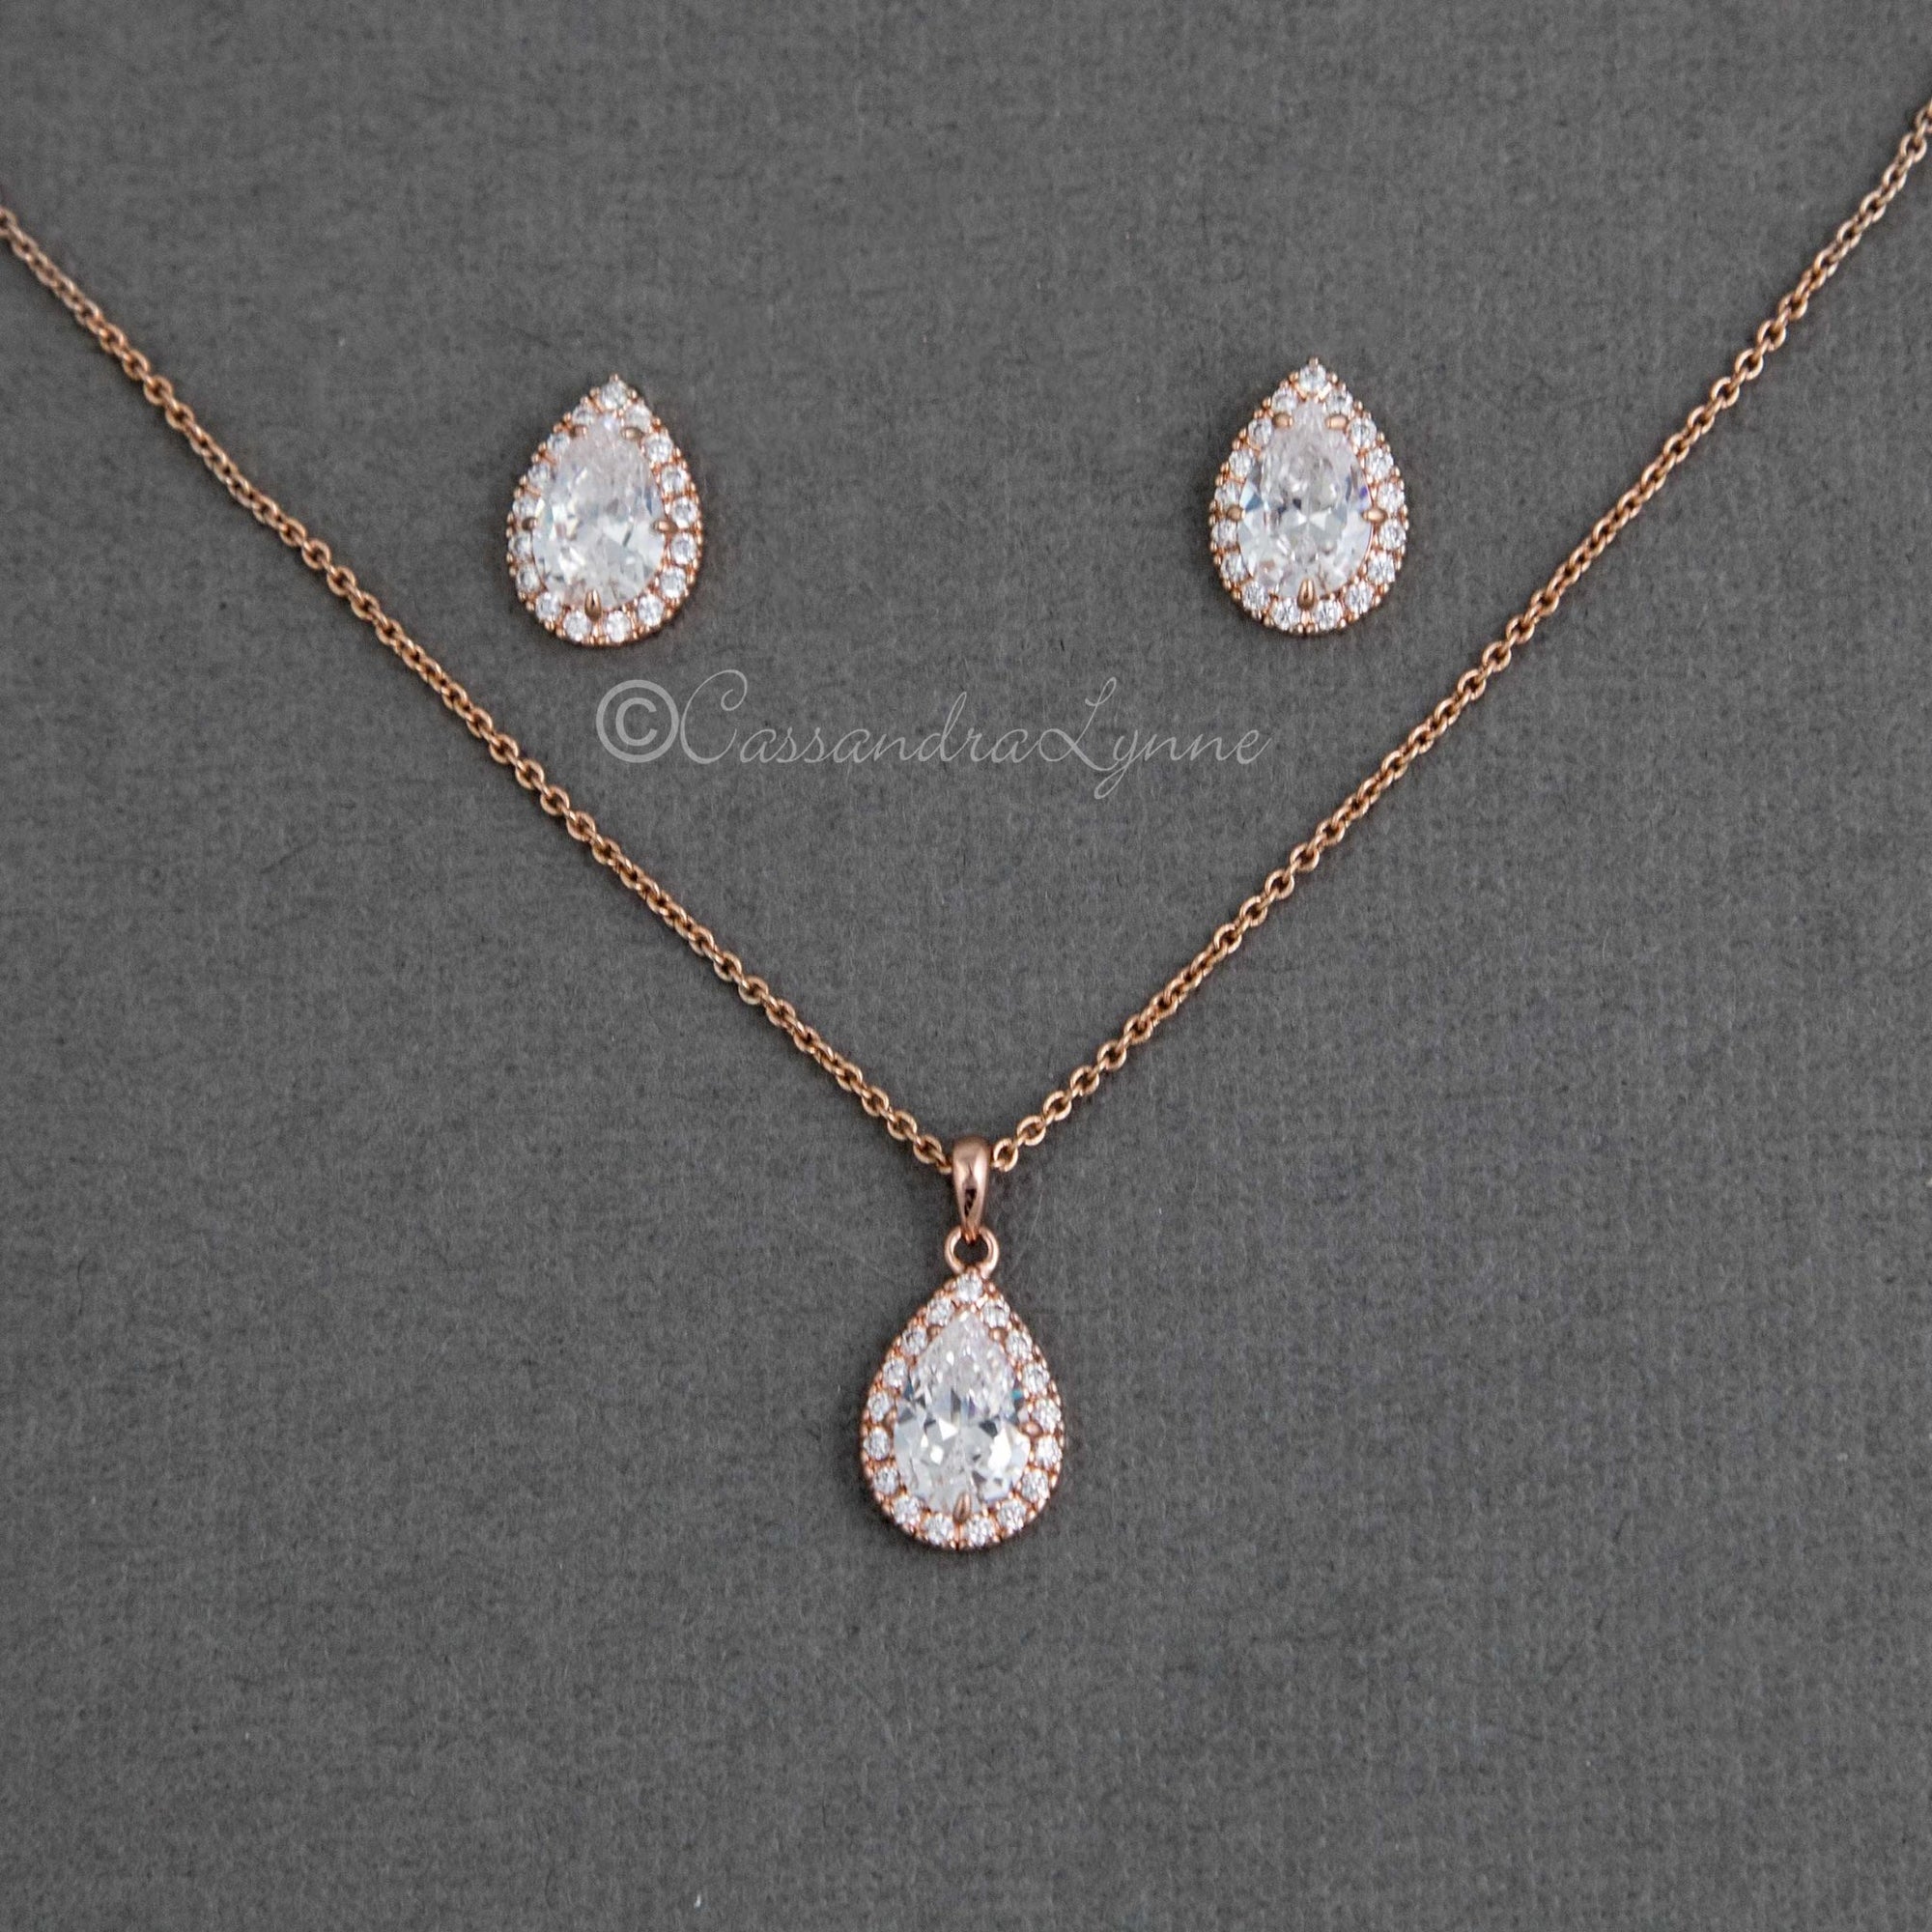 Classic CZ Necklace Pave Pear Pendant and Earrings - Cassandra Lynne